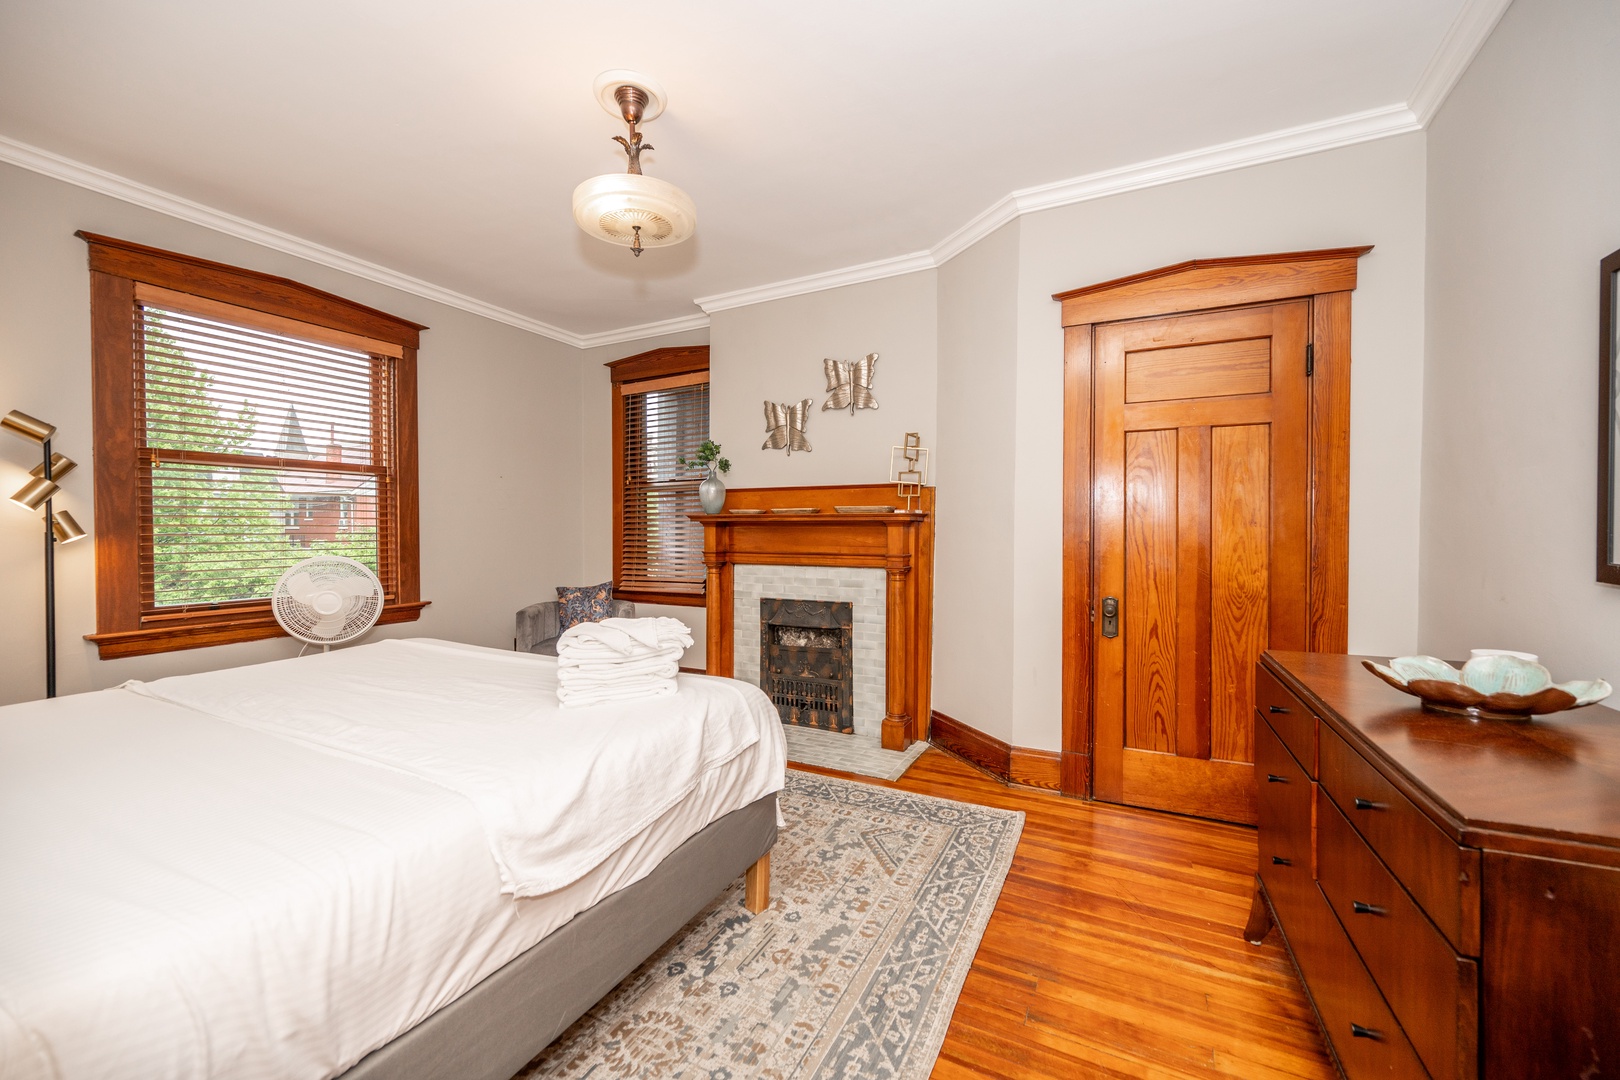 The second bedroom sanctuary features a cozy king-sized bed